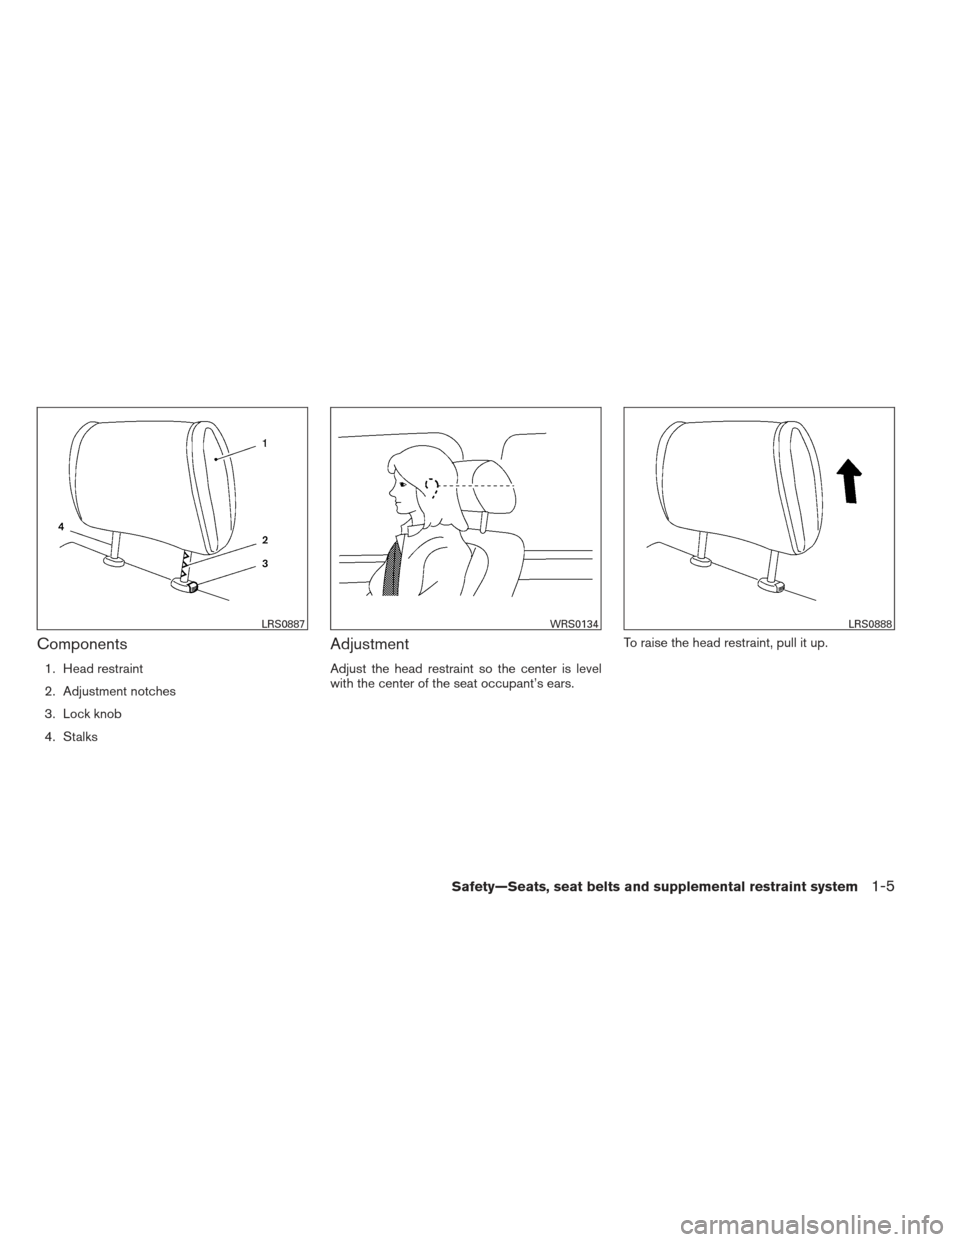 NISSAN XTERRA 2012 N50 / 2.G Owners Manual Components
1. Head restraint
2. Adjustment notches
3. Lock knob
4. Stalks
Adjustment
Adjust the head restraint so the center is level
with the center of the seat occupant’s ears.To raise the head re